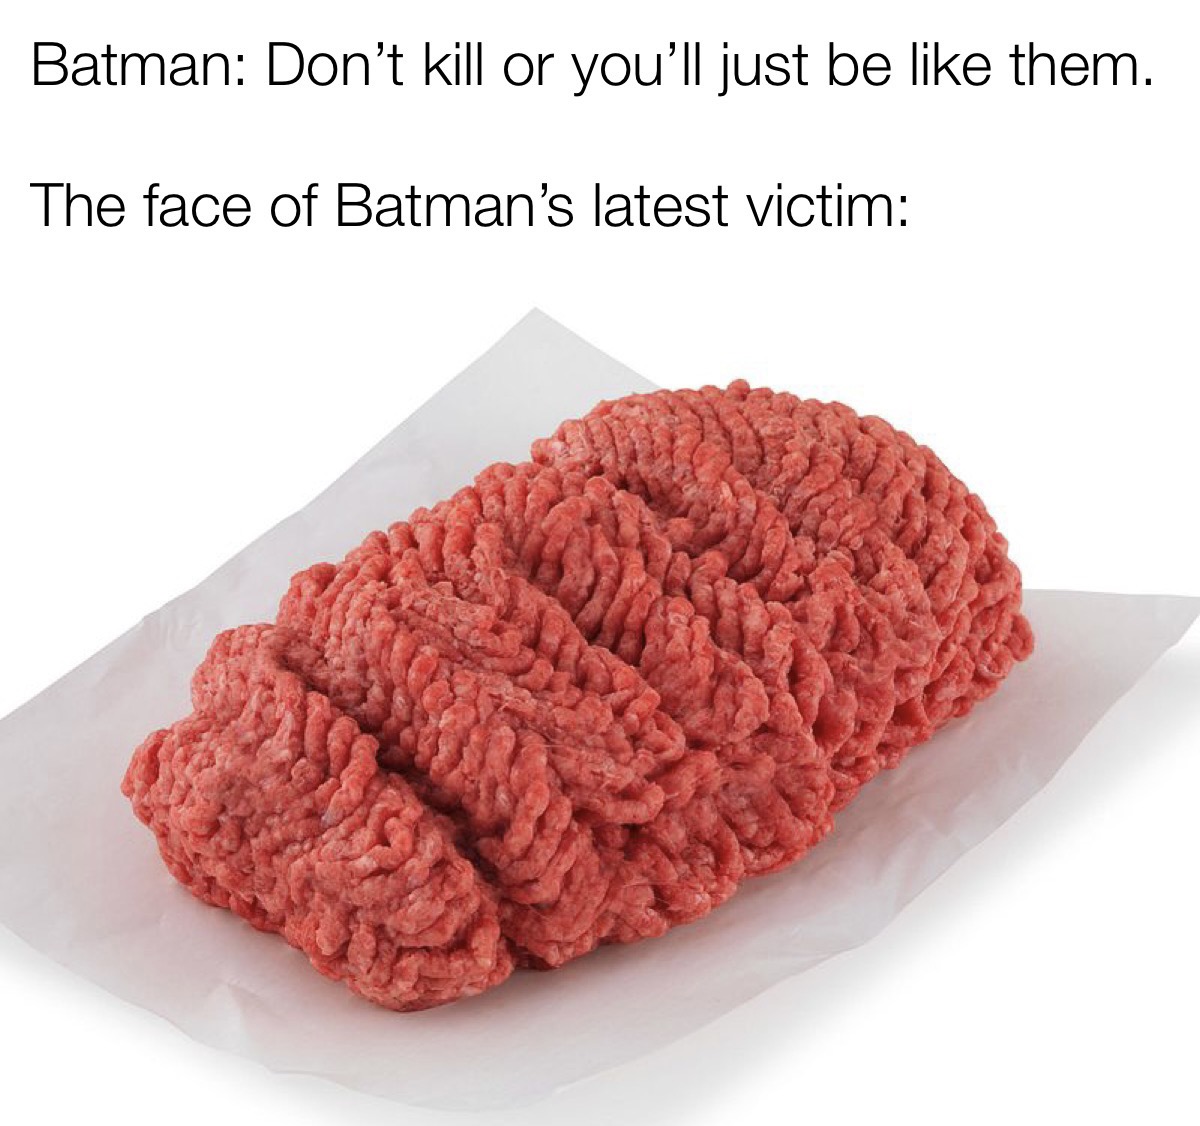 dank memes - funny memes - ground beef - Batman Don't kill or you'll just be them. The face of Batman's latest victim